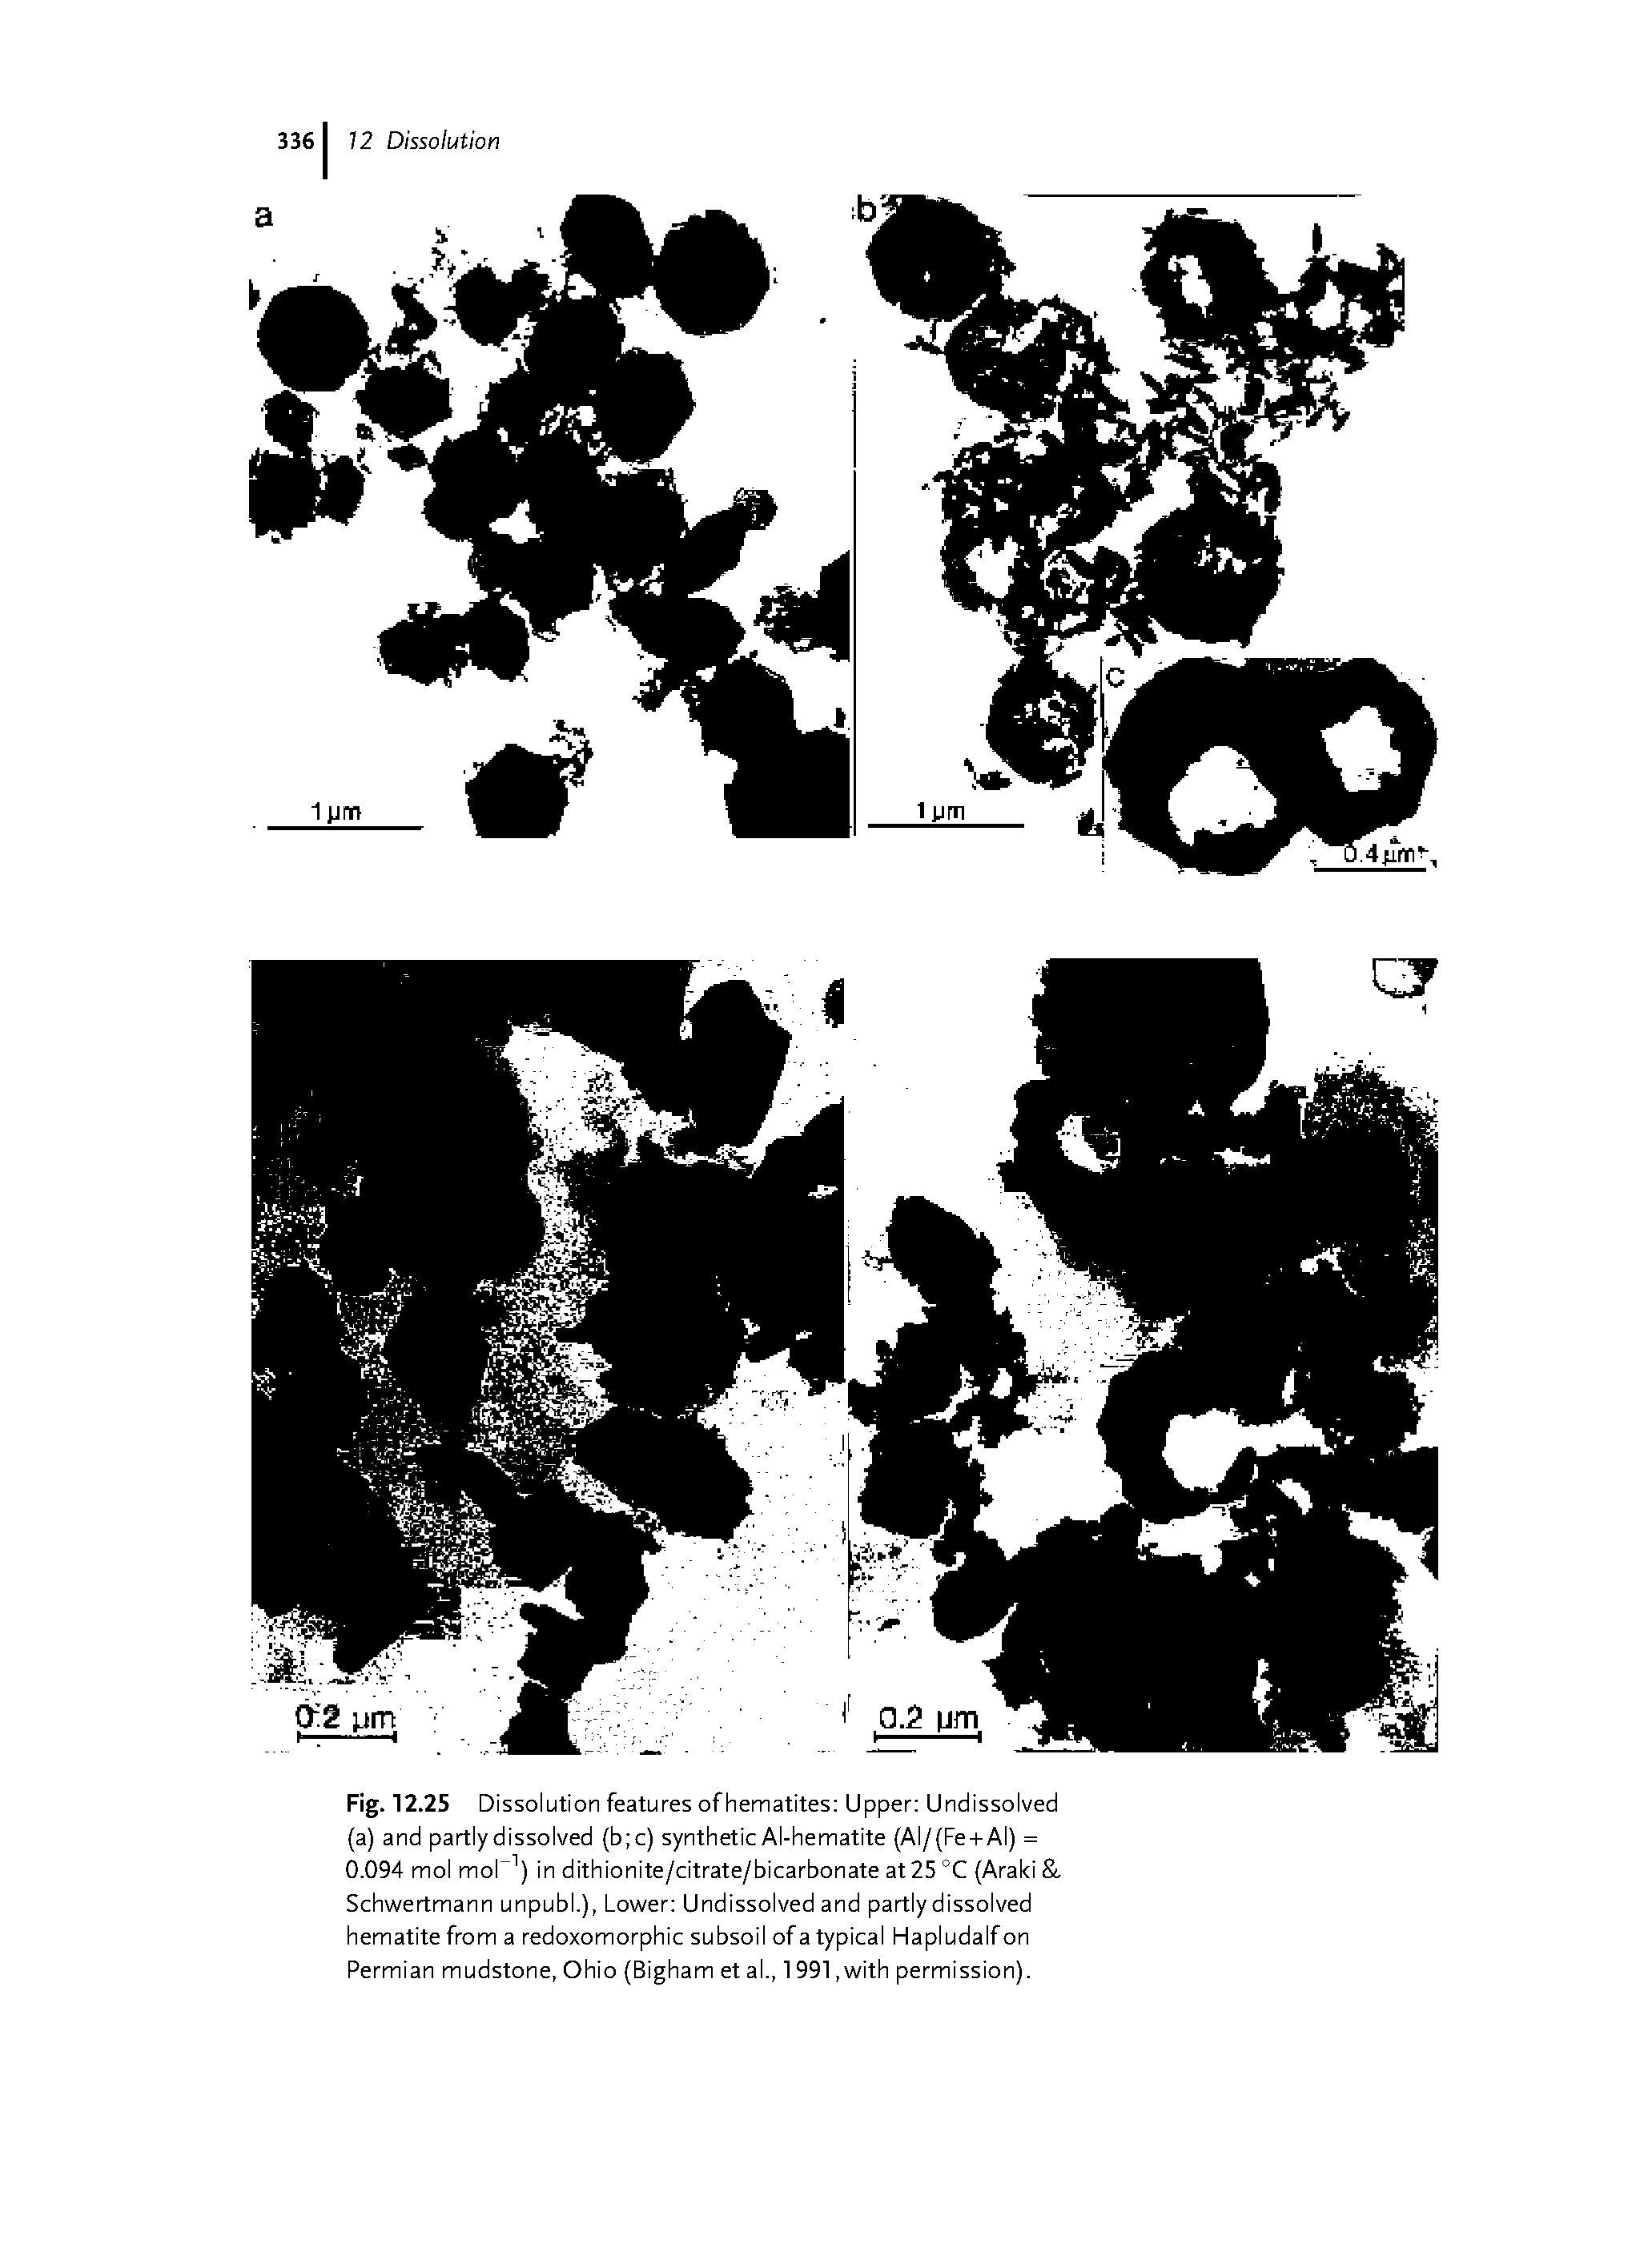 Fig. 12.25 Di ssolution features of hematites Upper Undissolved (a) and partly dissolved (b c) synthetic Al-hematite (AI/(Fe+AI) = 0.094 mol moT j in dithionite/citrate/bicarbonate at25 (Araki Sch A/ertmann unpubl.), Lo A/er Undissolved and partly dissolved hematite from a redoxomorphic subsoil of a typical Hapludalf on Permian mudstone, Ohio (Bigham et al., 1991, A/ith permission).